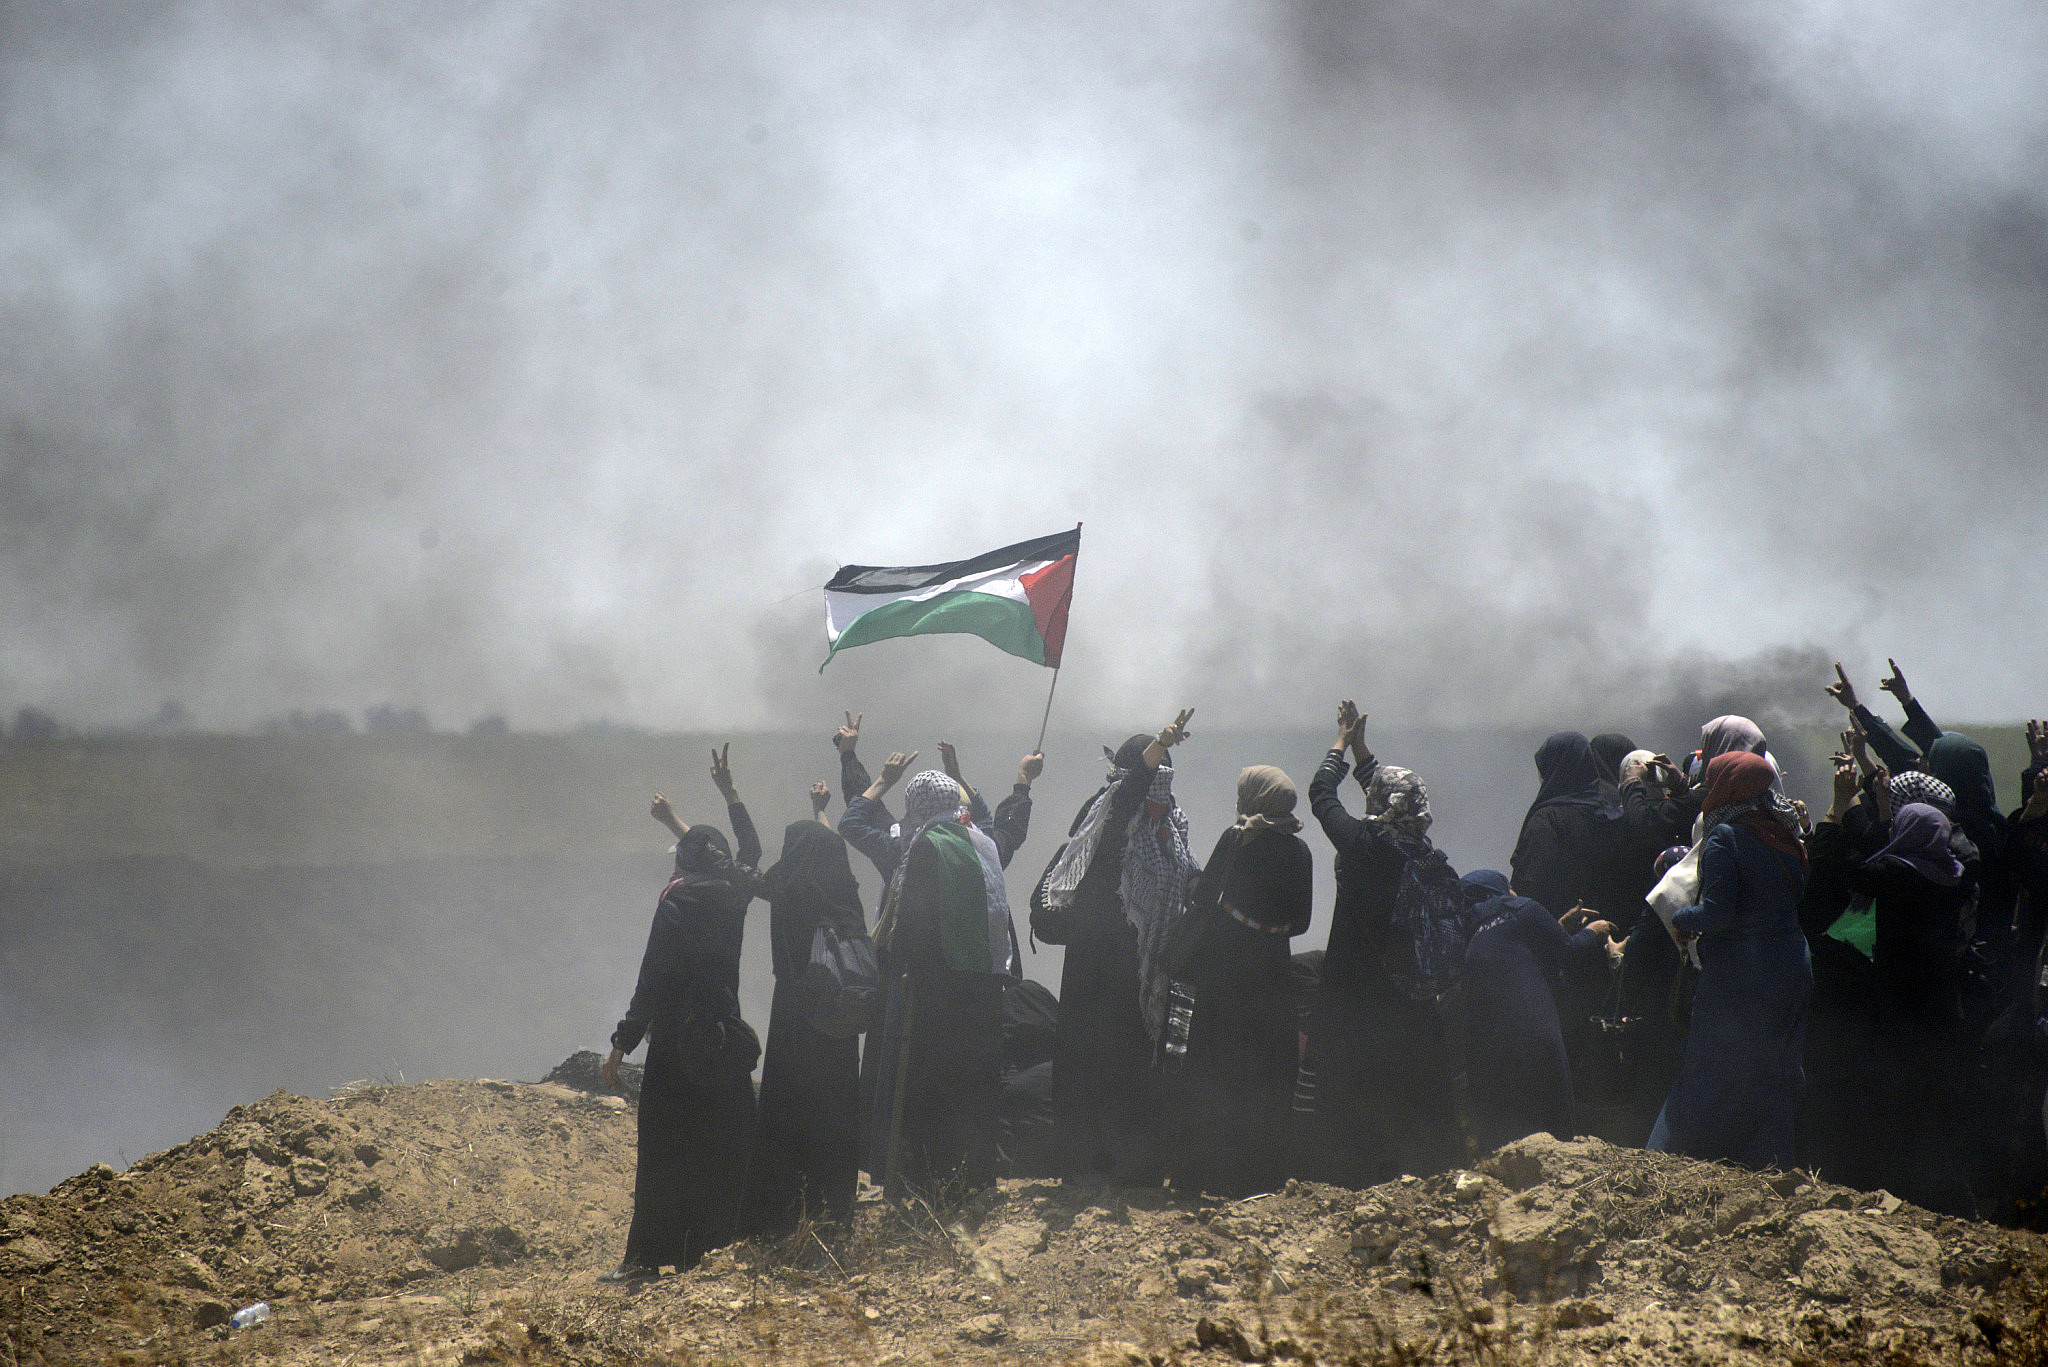 A group of Palestinian women demonstrate during a protest on the Gaza border, May 14, 2018. (Mohammed Zaanoun/Activestills.org)